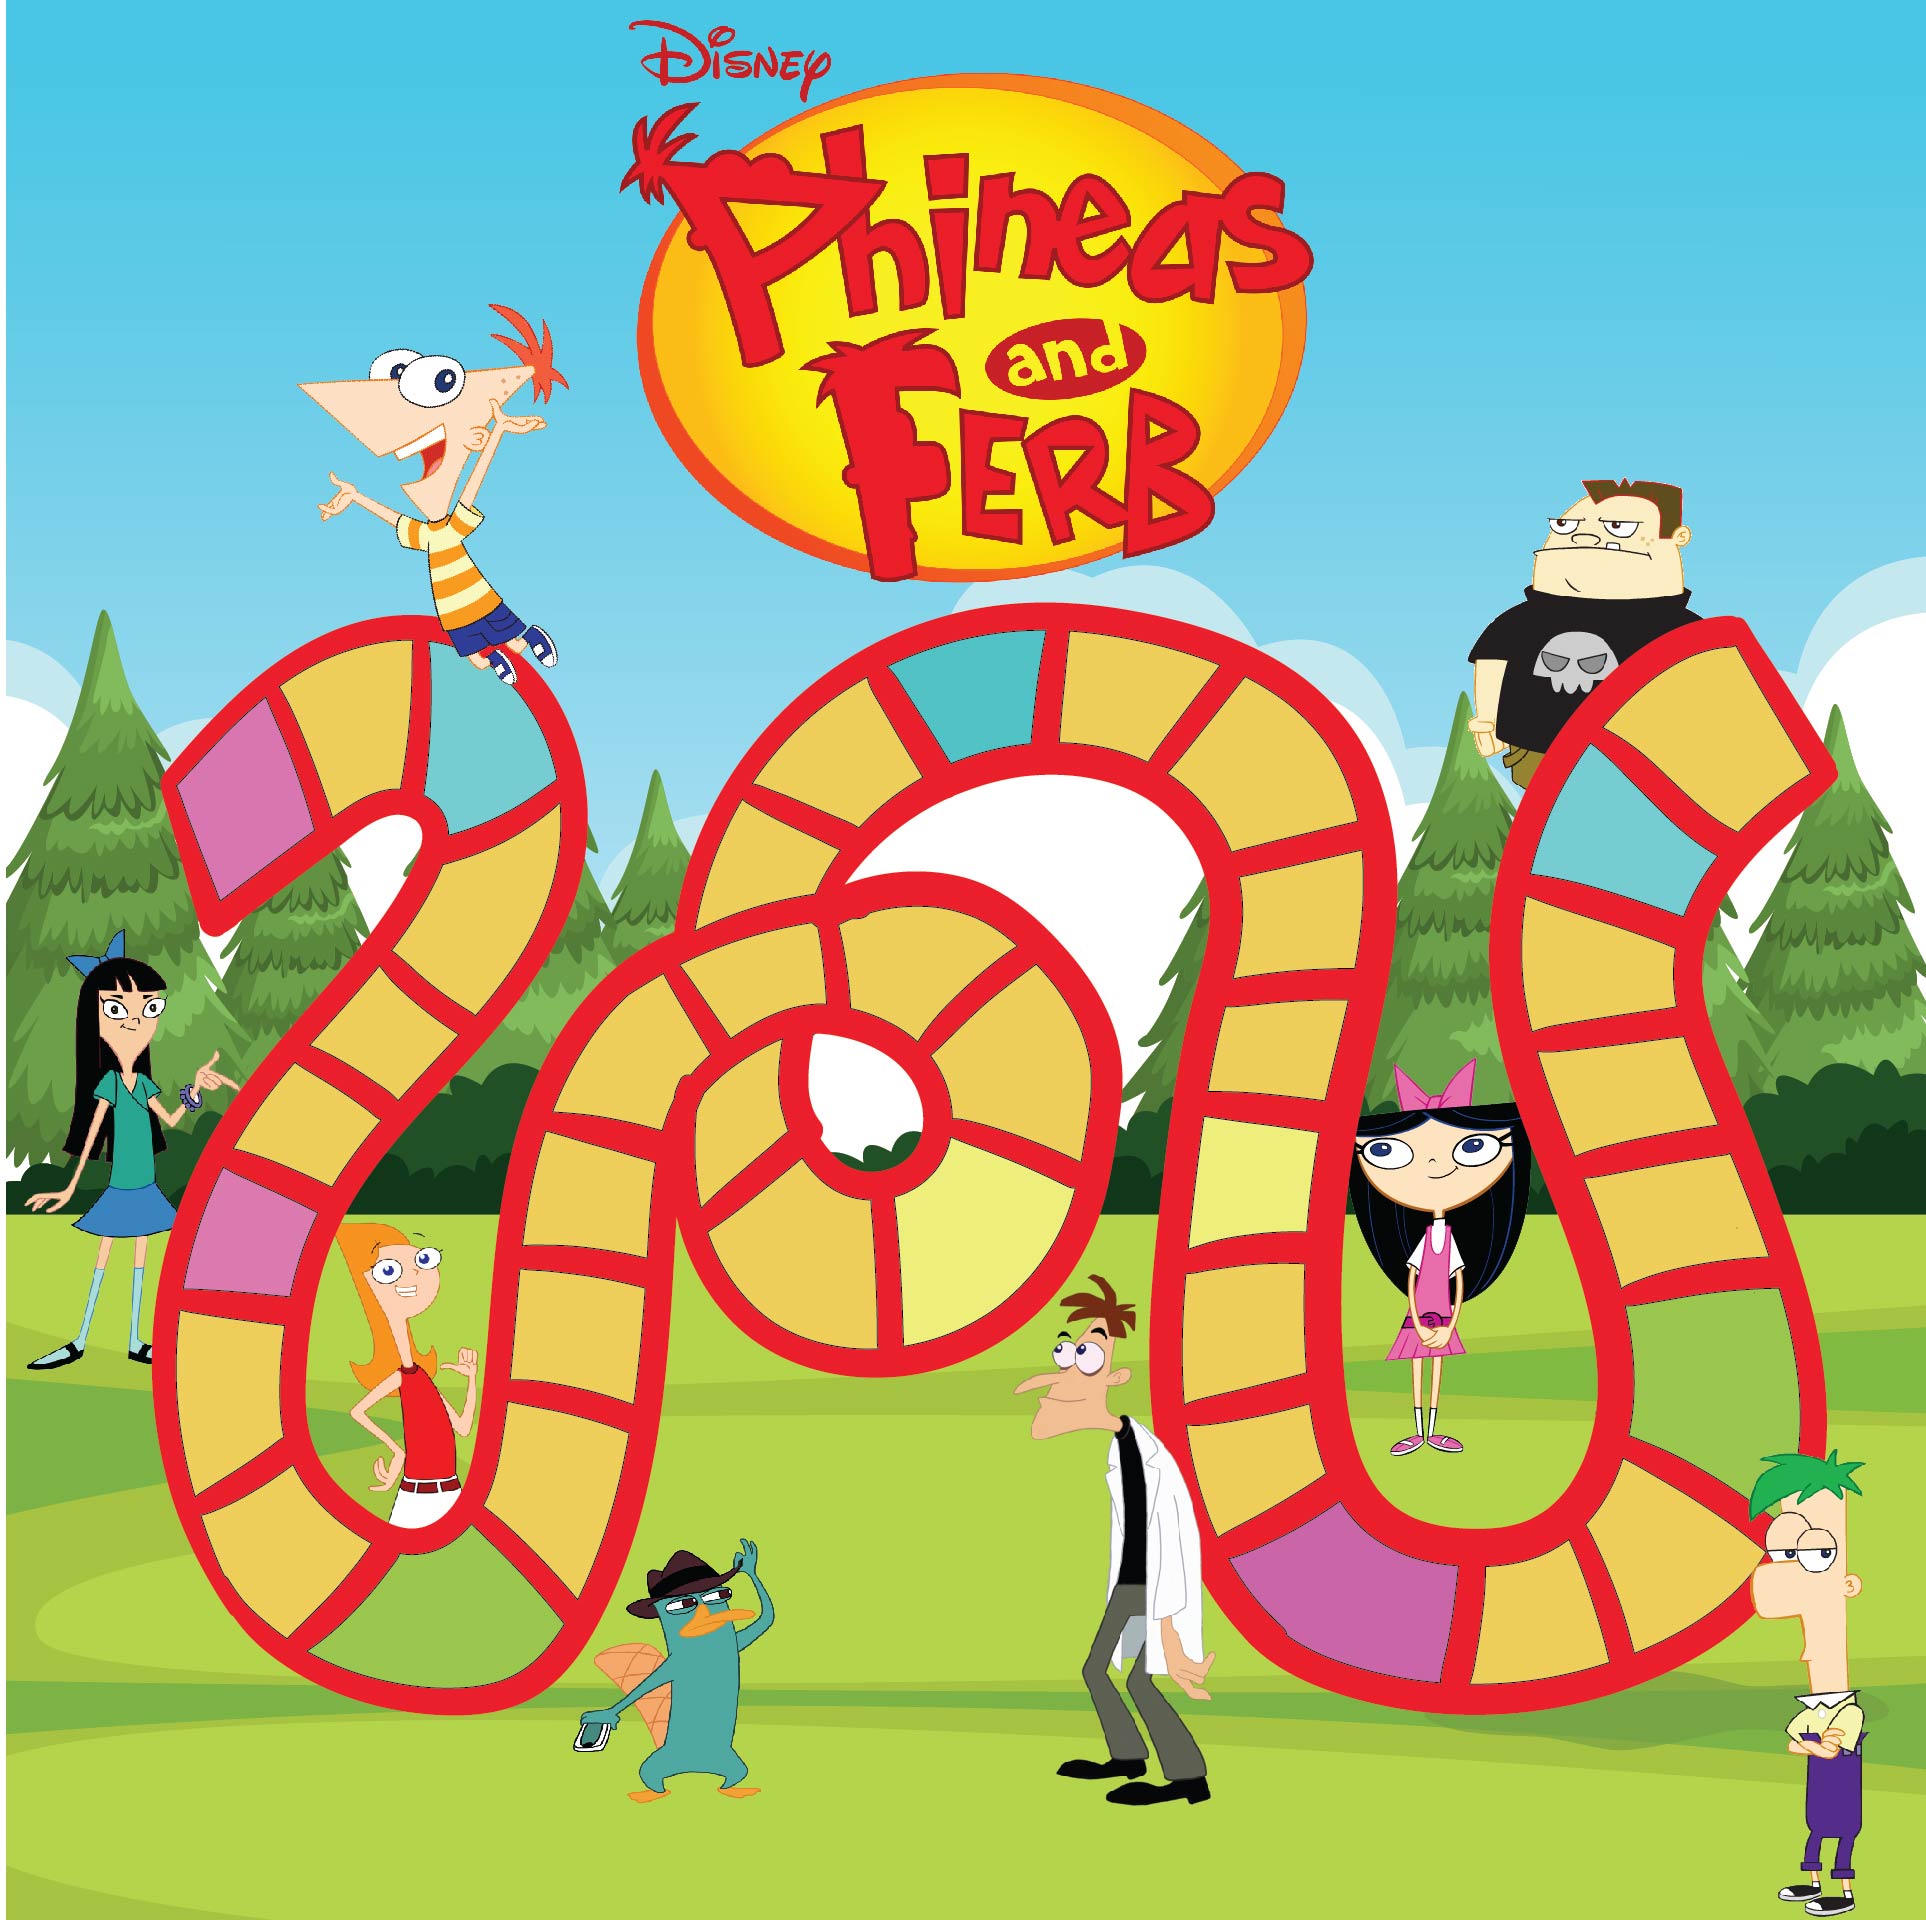 Phineas and Ferb Board Game